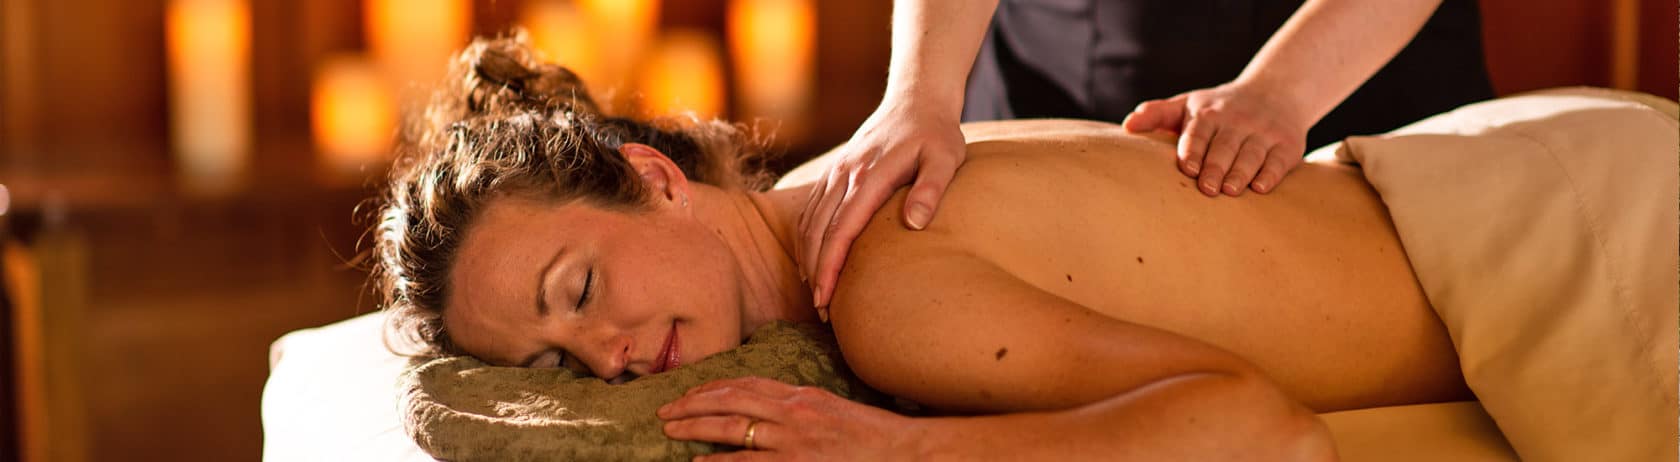 An image of a woman lying on a massage table with a smile, eyes closed, and receiving a relaxing stress-relief massage at a spa.